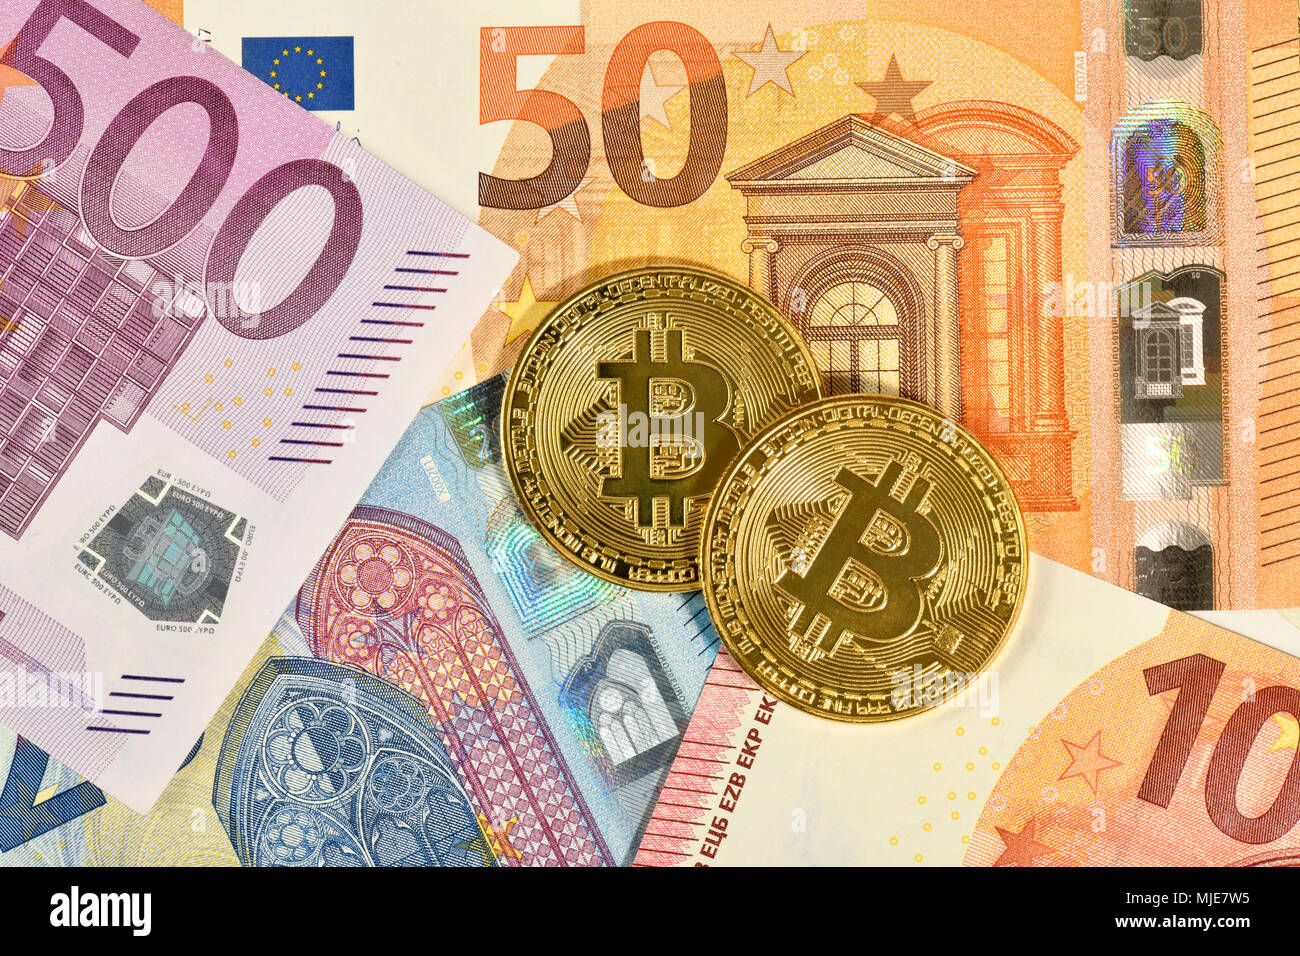 icon for digital currency, golden physical coin bitcoin on EURO banknotes Stock Photo